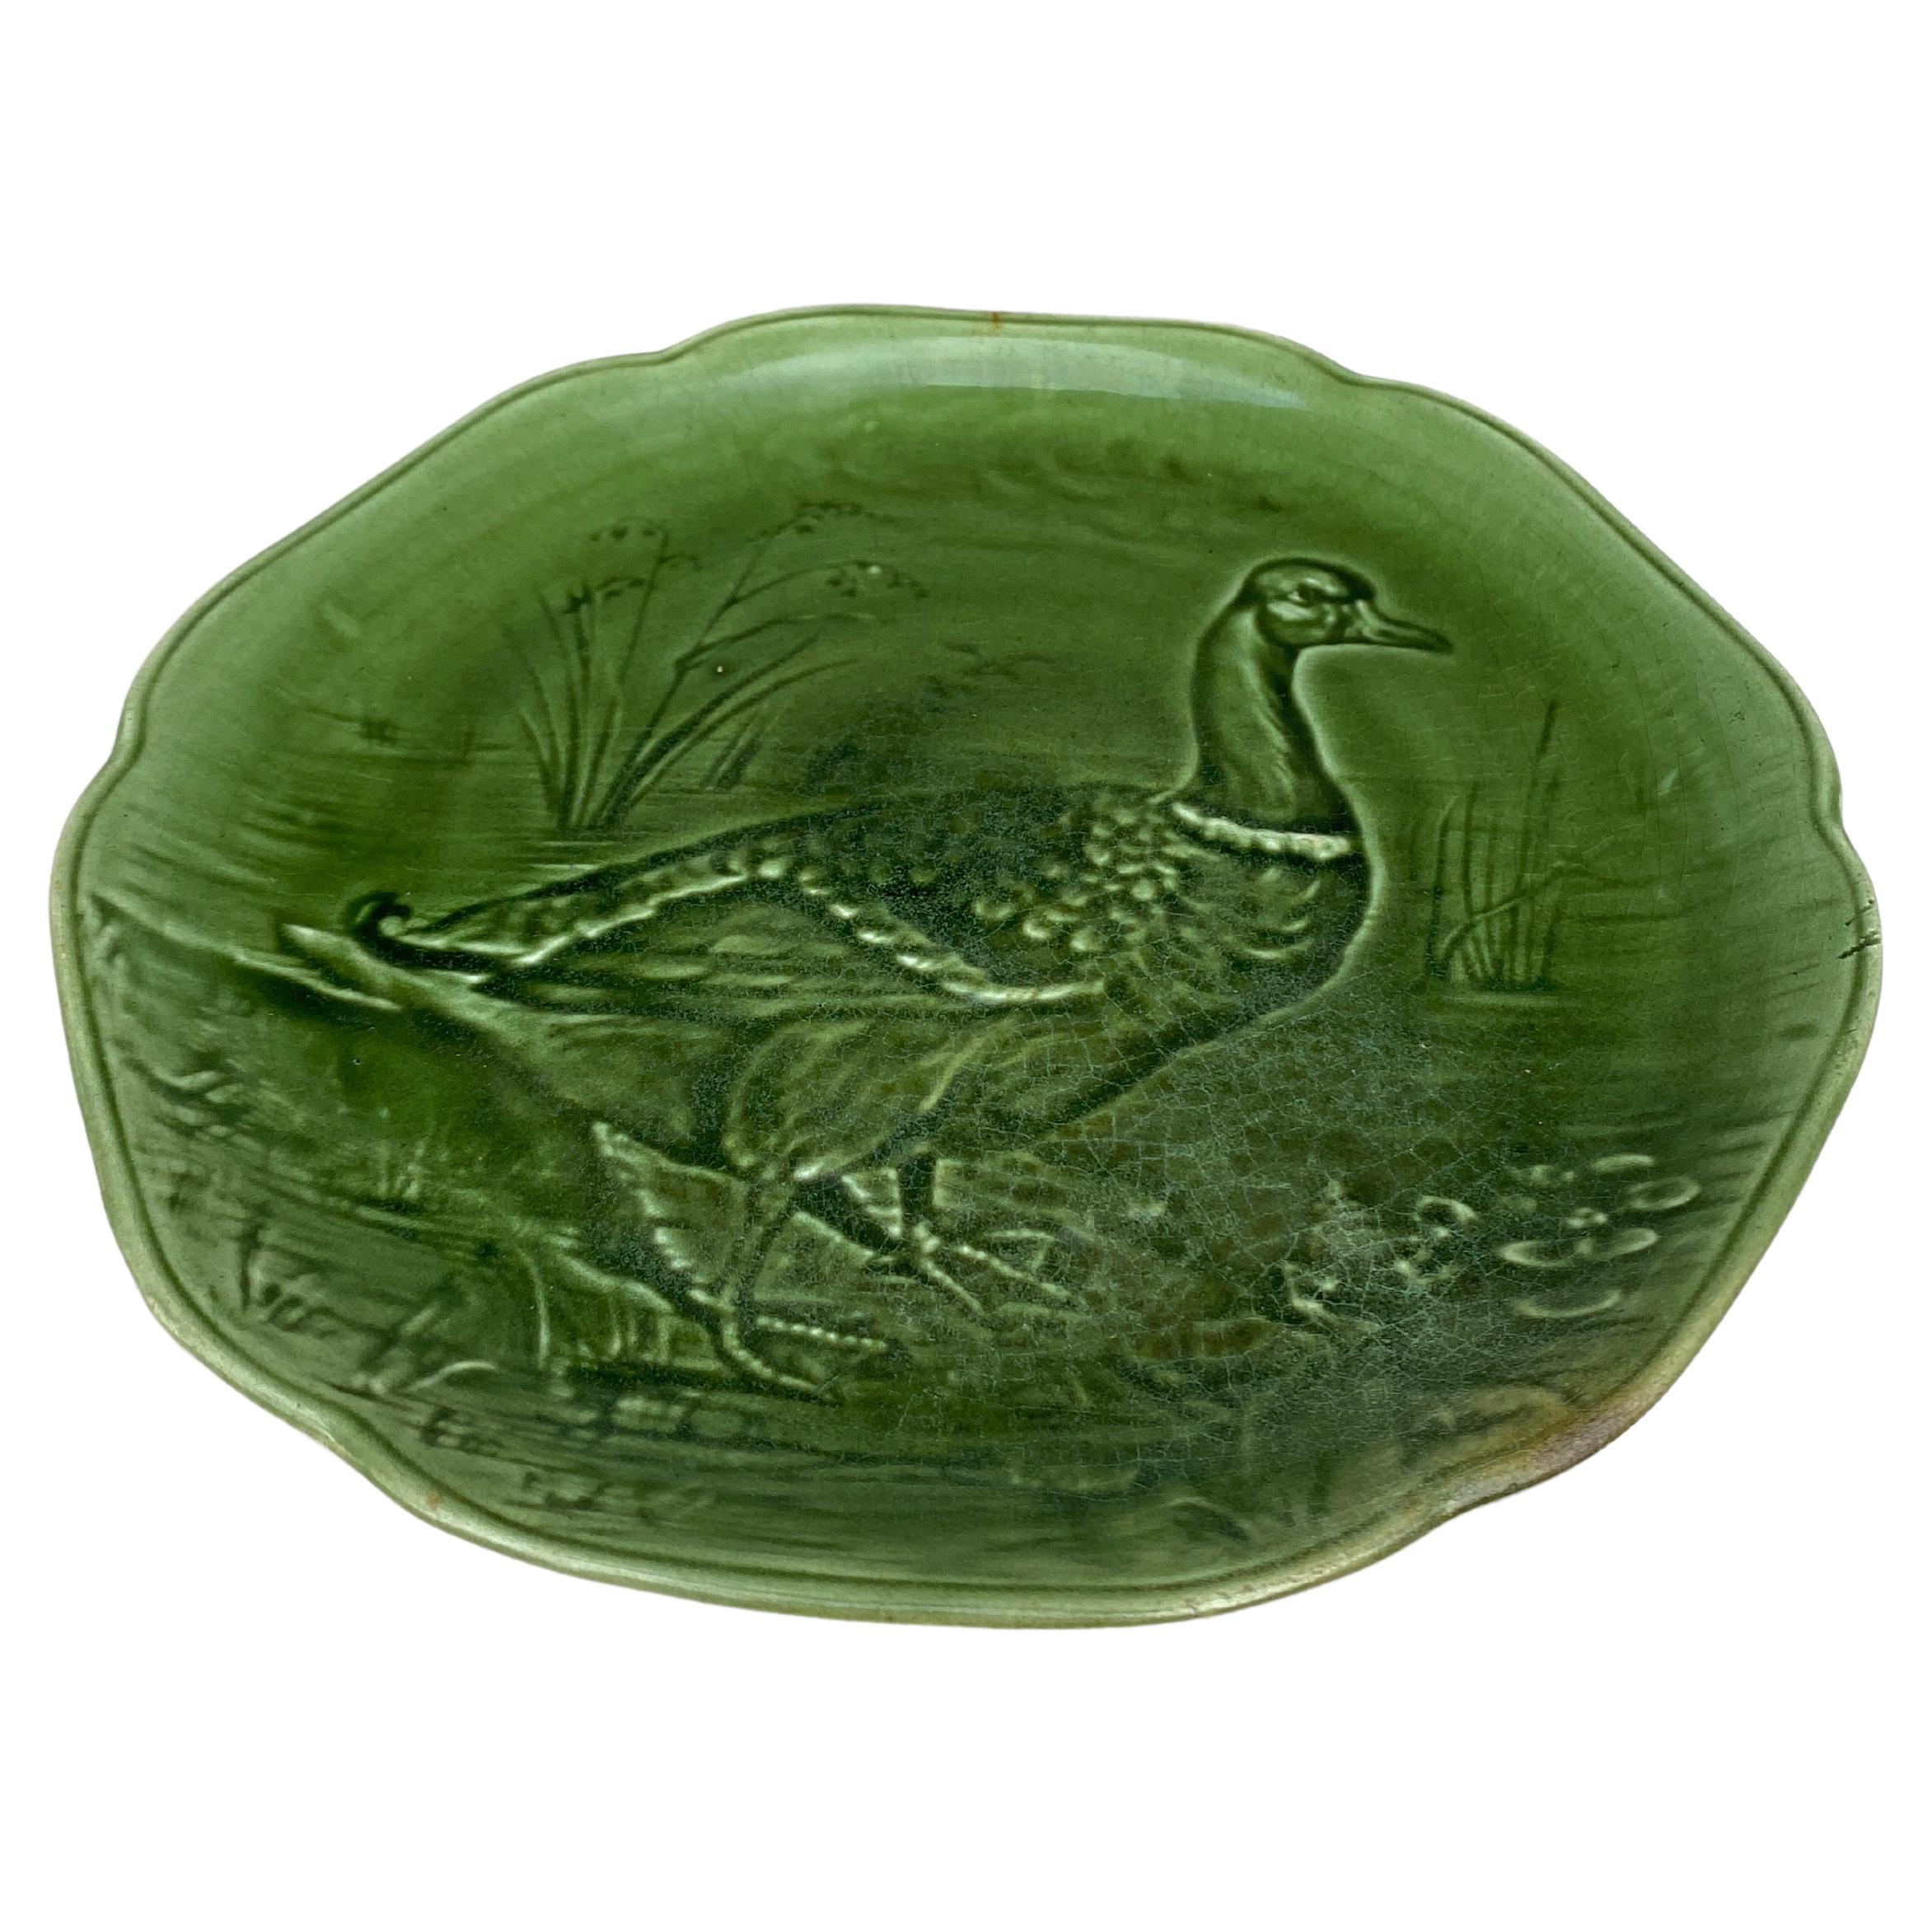 19th Century Green Majolica Mallard Duck Plate Hippolyte Boulenger Choisy le Roi, circa 1890.
The manufacture of Choisy le Roi was one of the most important manufacture at the end of 19th century, they produced very high quality ceramics of all